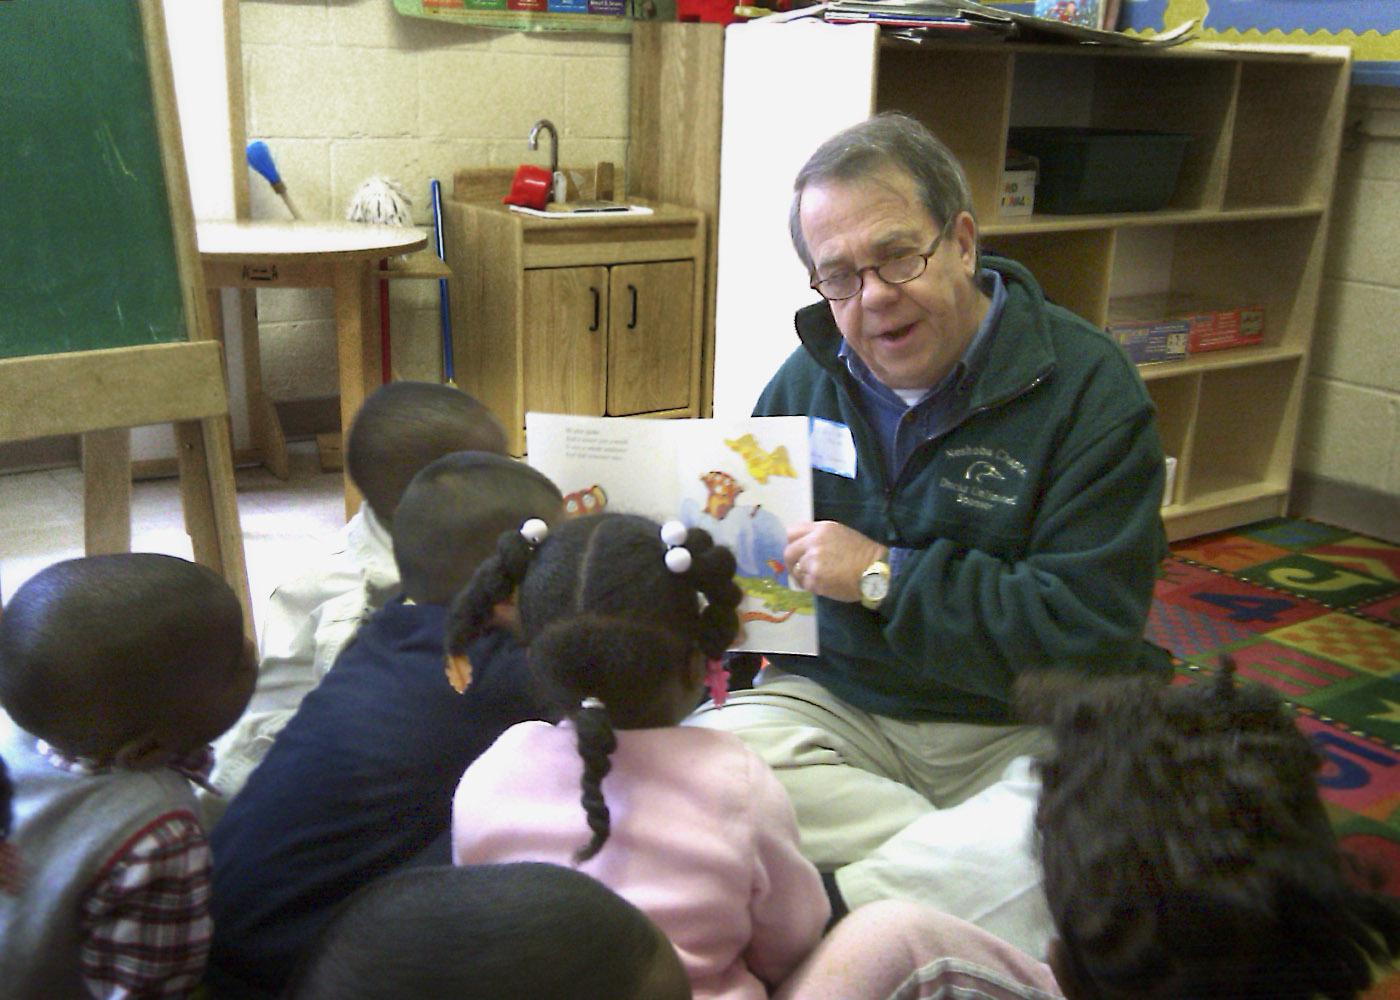 Mississippi Sen. Giles K. Ward reads "Leo the Late Bloomer" to Head Start students as a Neshoba County Preschool Literacy Project volunteer. (Submitted photo)